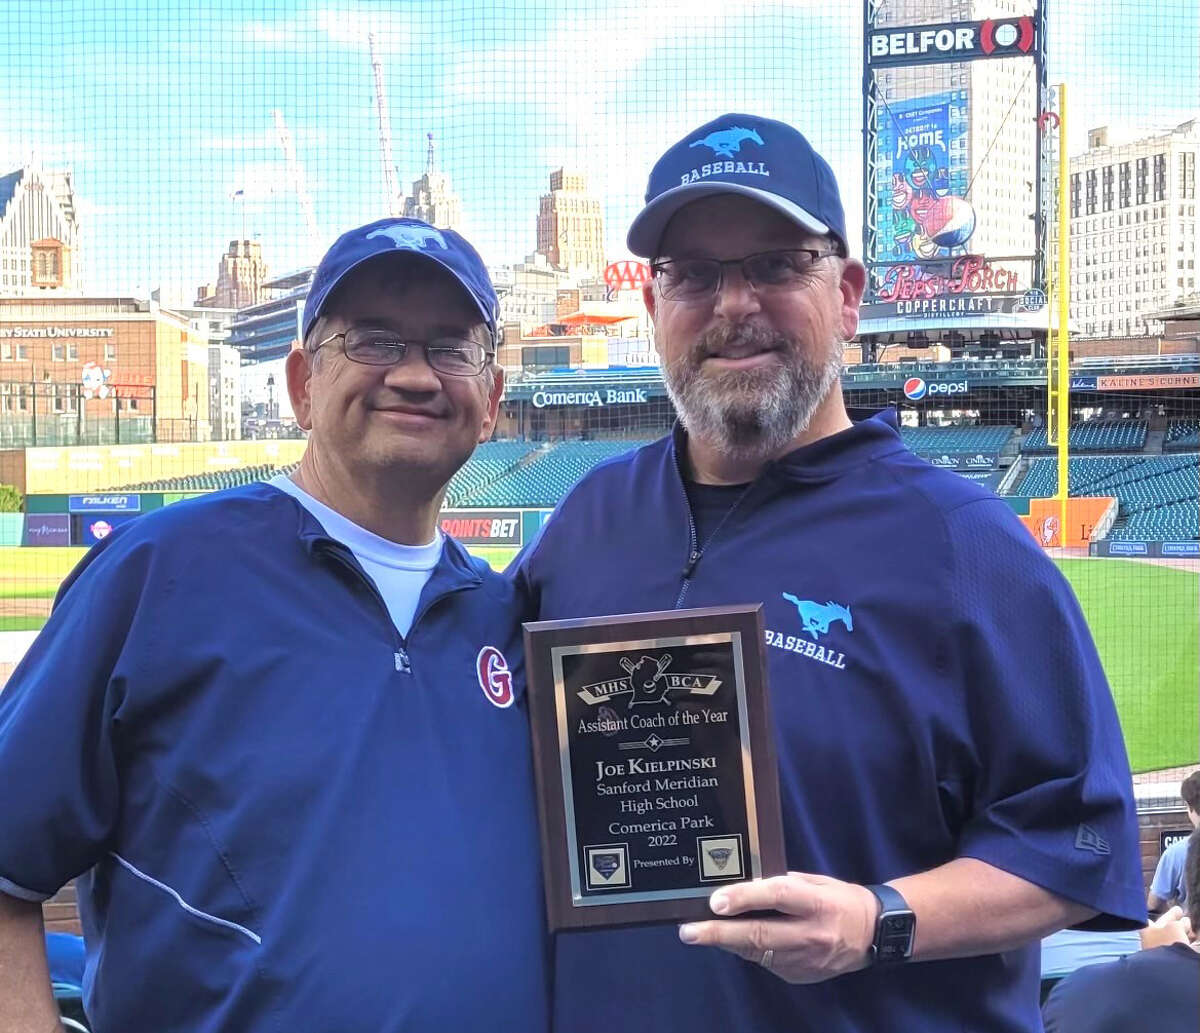 Meridian baseball assistant coach Joe Kielpinski (right) poses with longtime friend and Meridian baseball head coach Mark Novak after Kielpinski received the Assistant Coach of the Year award from the Michigan High School Baseball Coaches Association during Monday's MHSBCA all-star games at Comerica Park in Detroit.